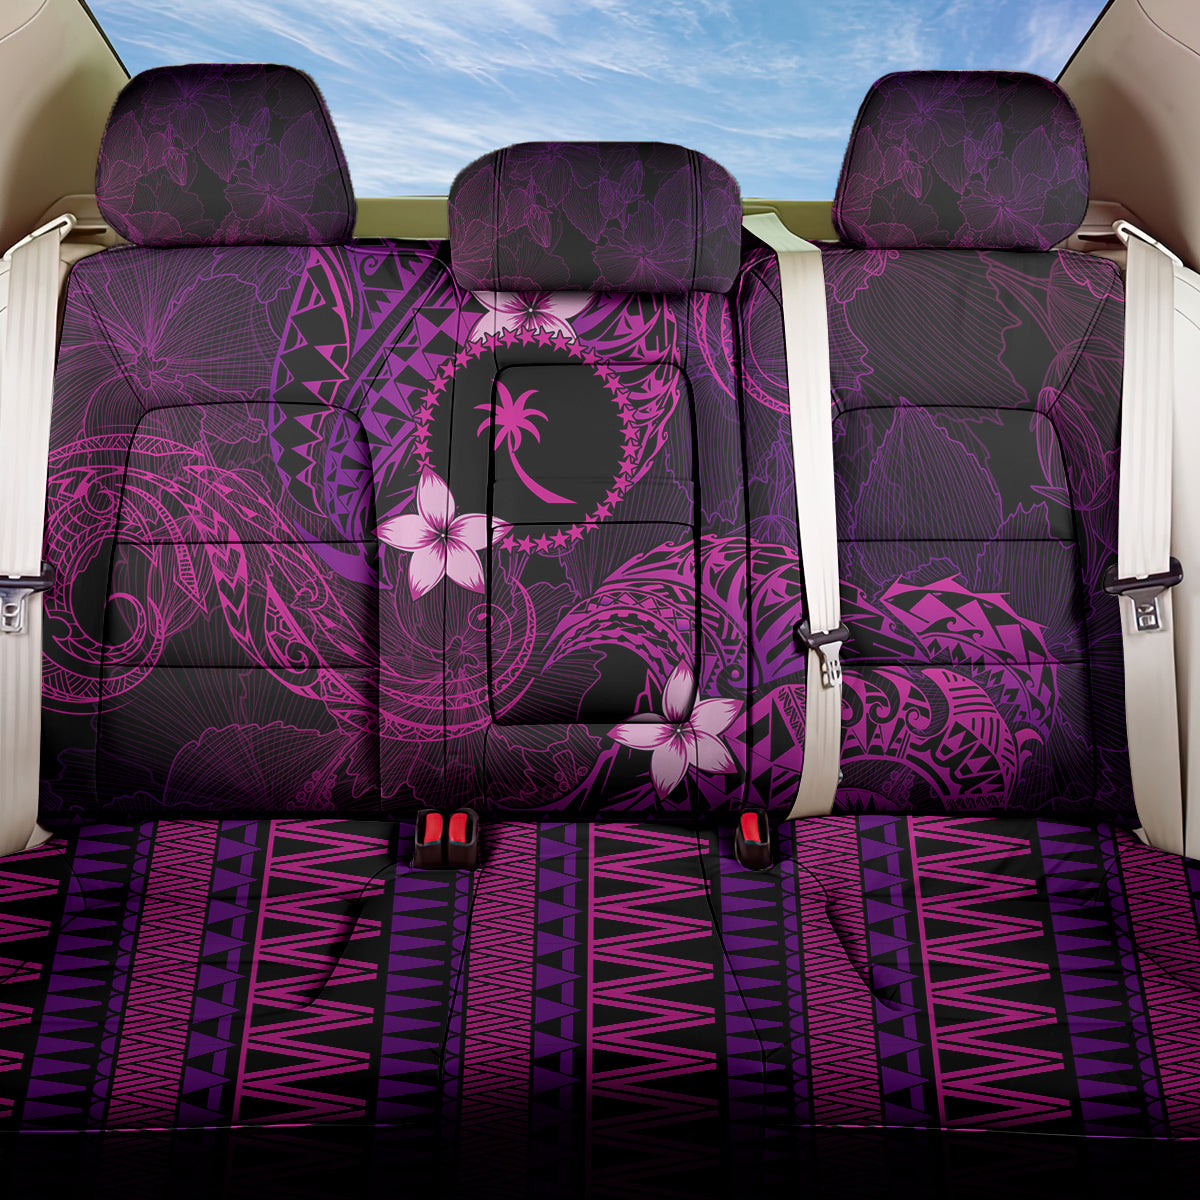 FSM Chuuk State Back Car Seat Cover Tribal Pattern Pink Version LT01 One Size Pink - Polynesian Pride